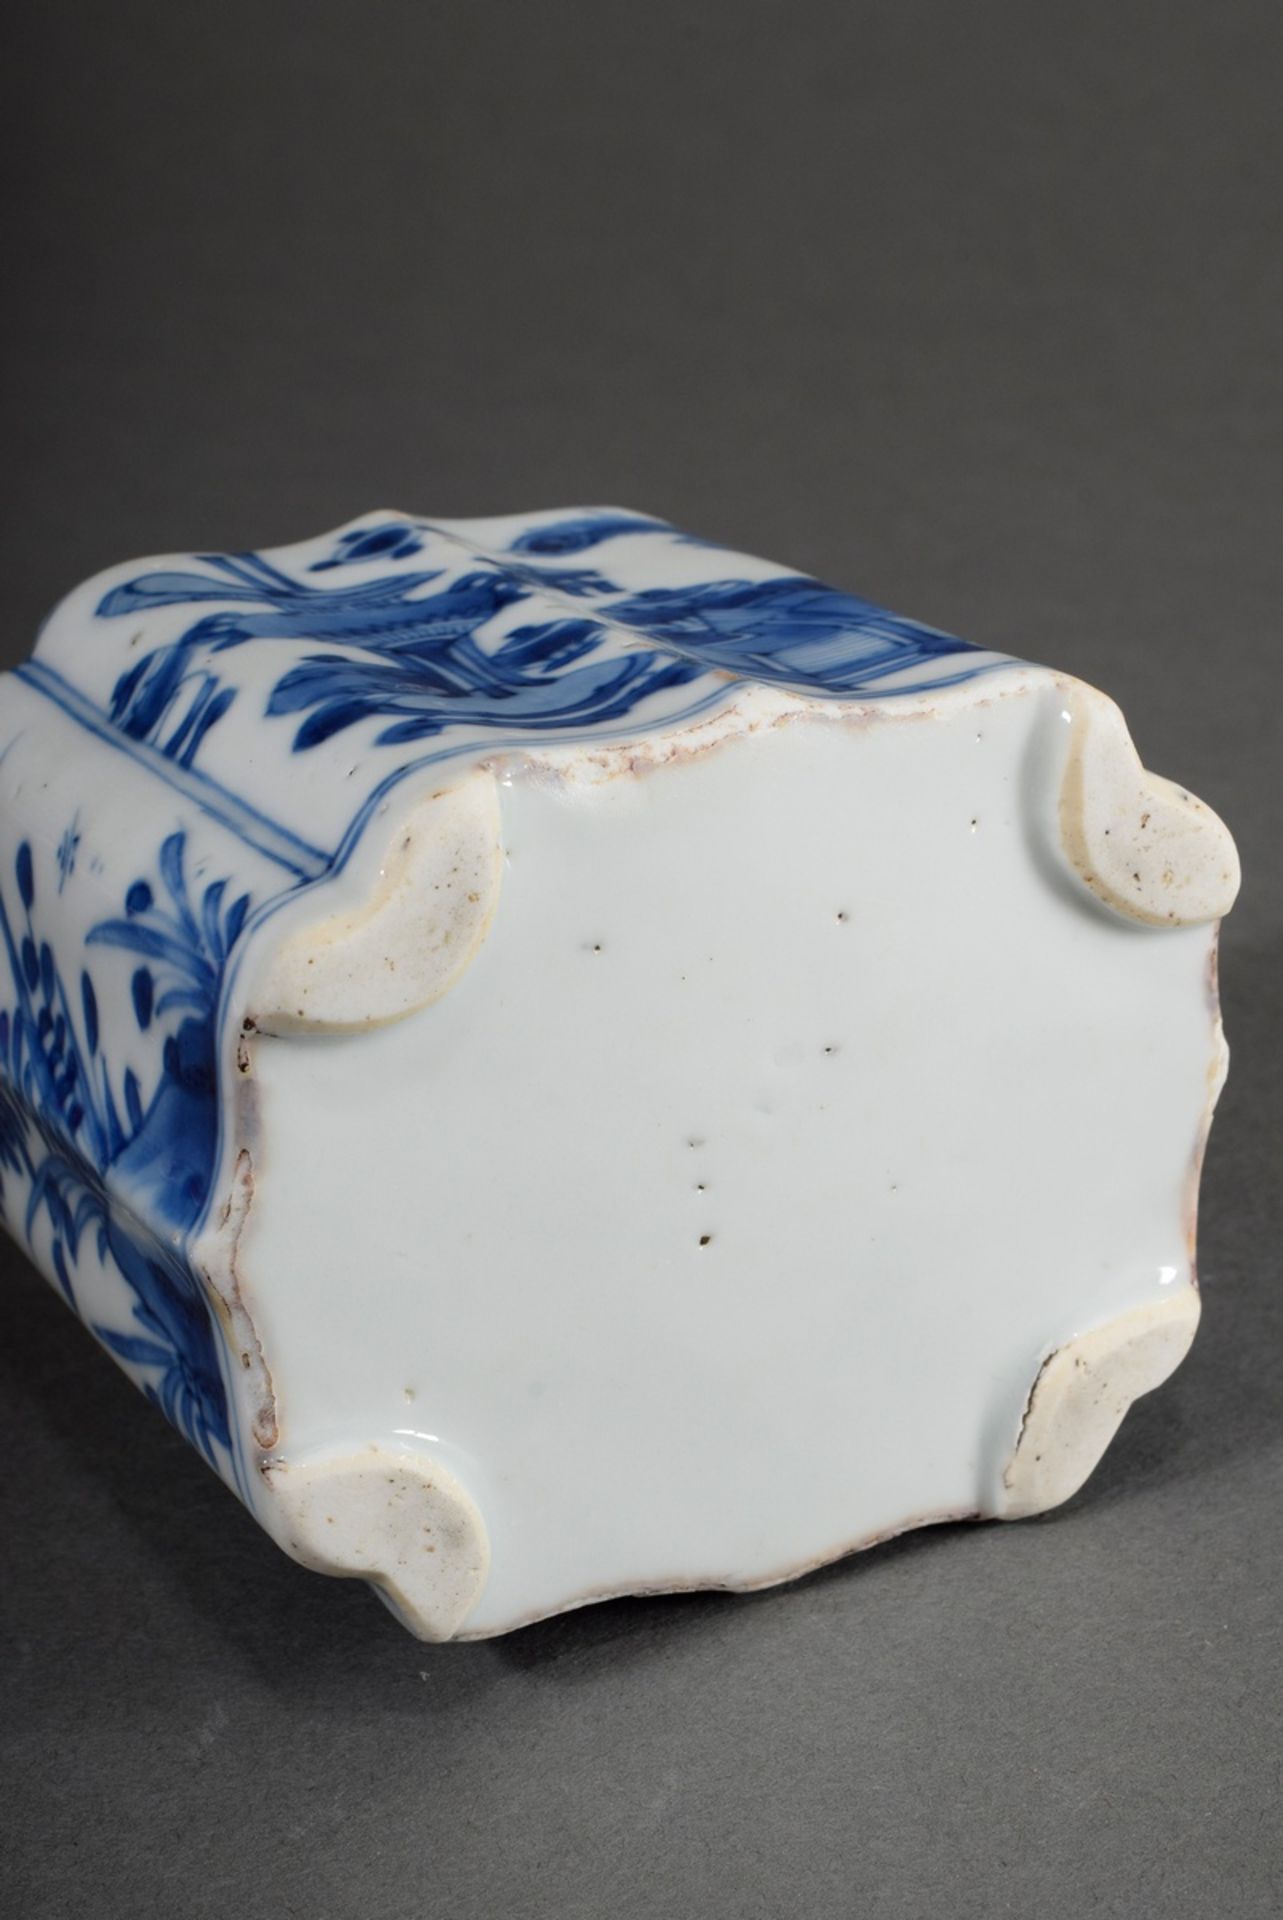 Small Chinese teapot with blue painting decor "Buddhist Symbols and Scholar Objects" on faceted wal - Image 6 of 6